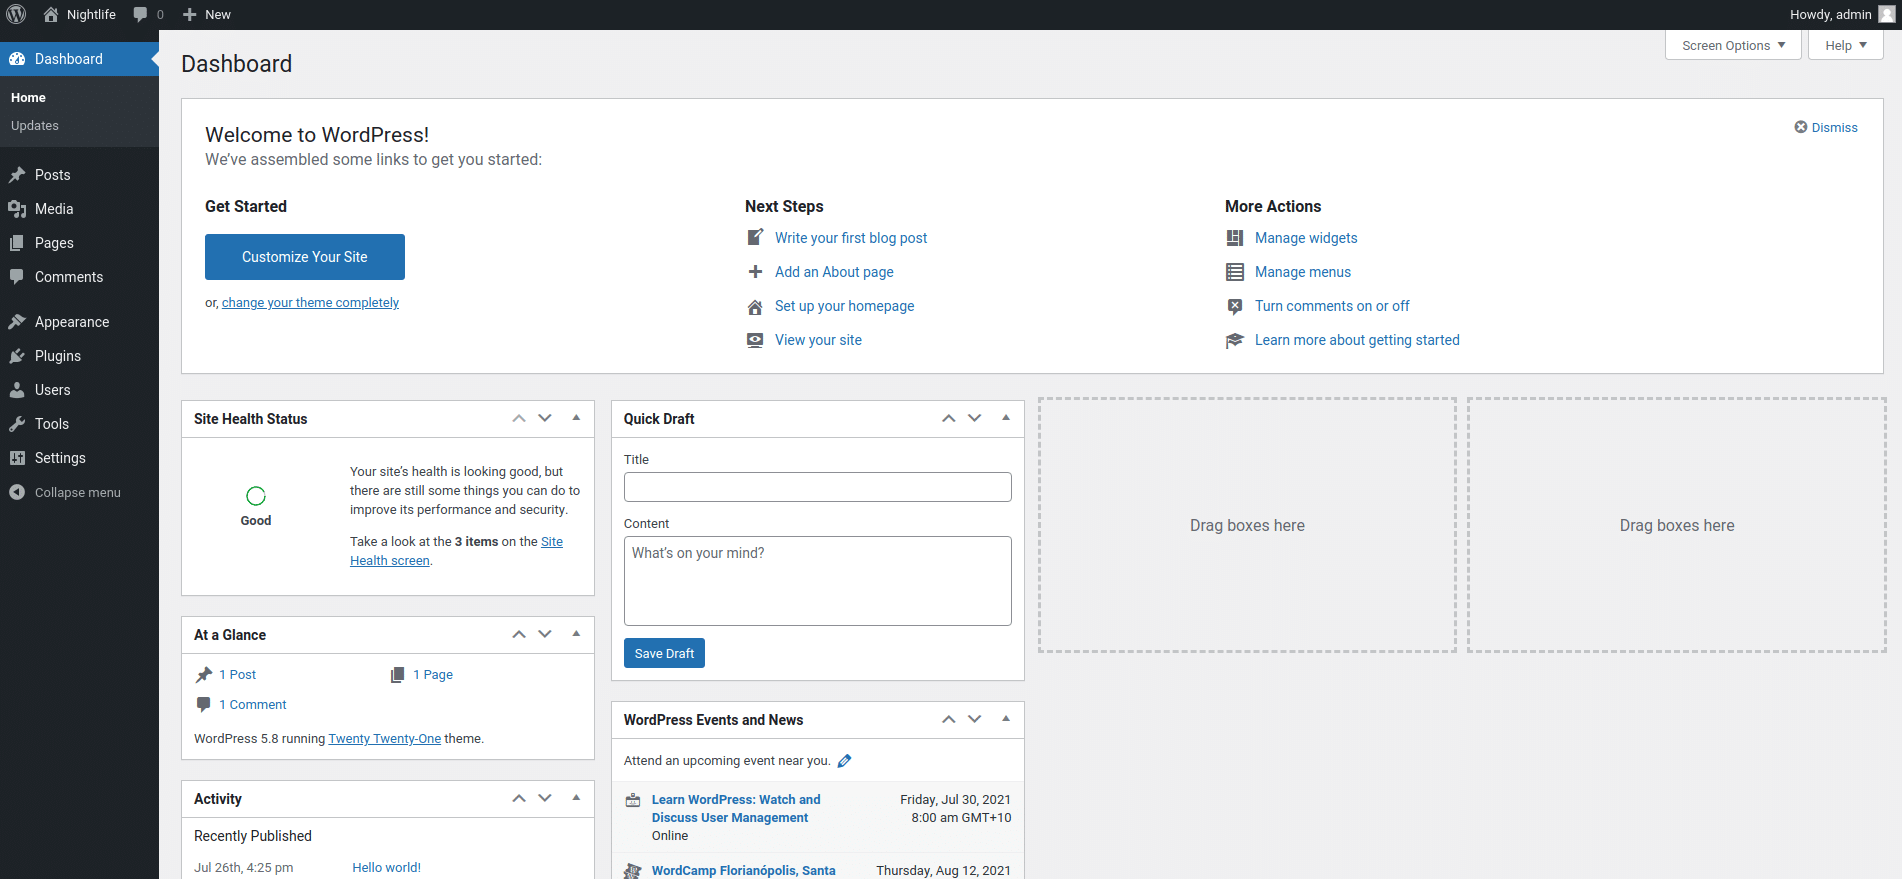 Login to your WordPress dashboard to install a new theme.